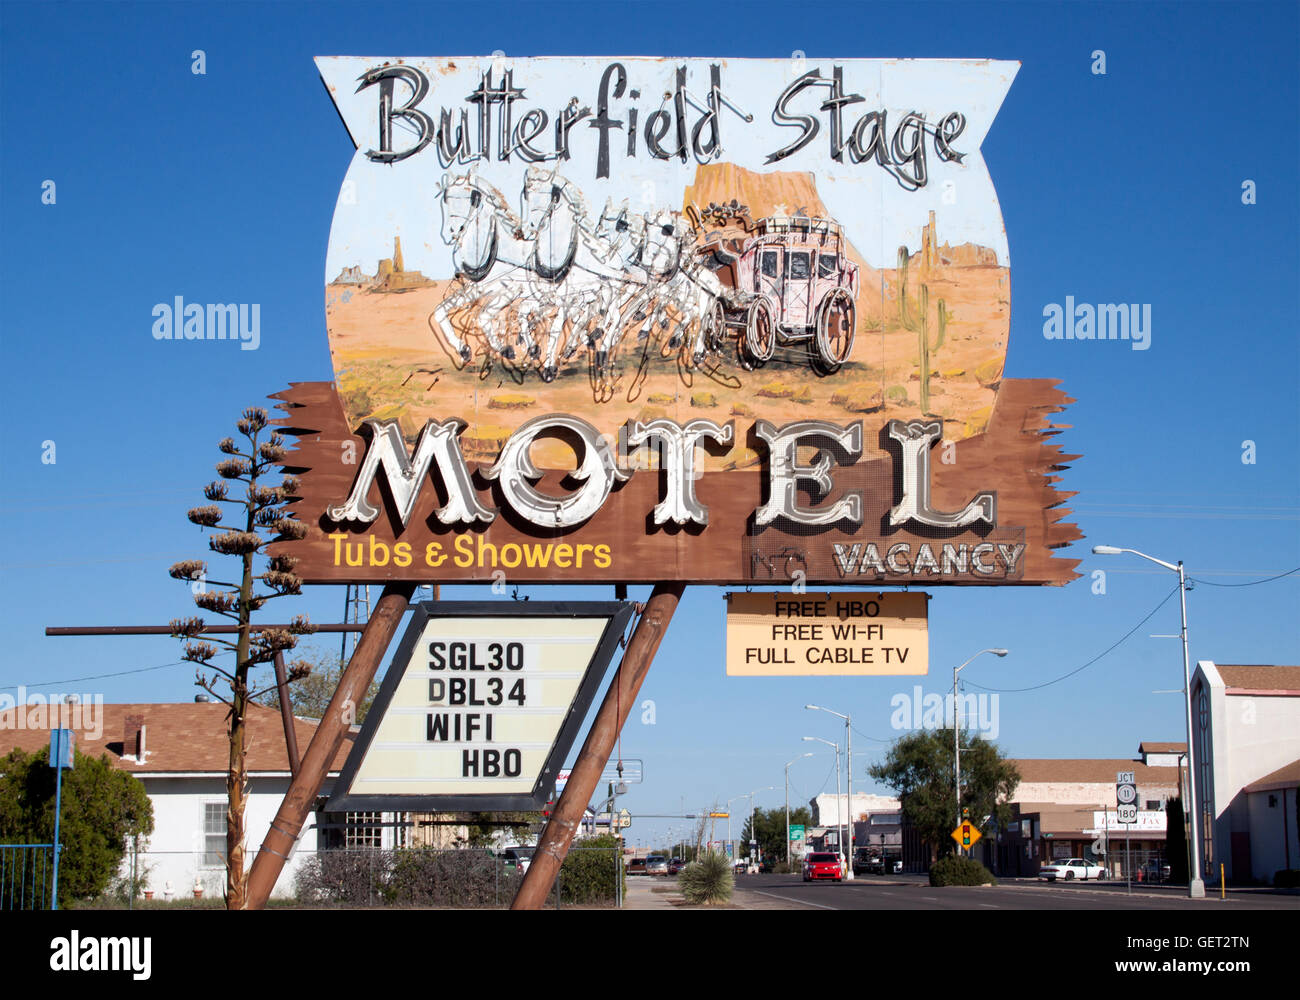 Butterfield Stage coach Motel sign in Deming New Mexico Stock Photo